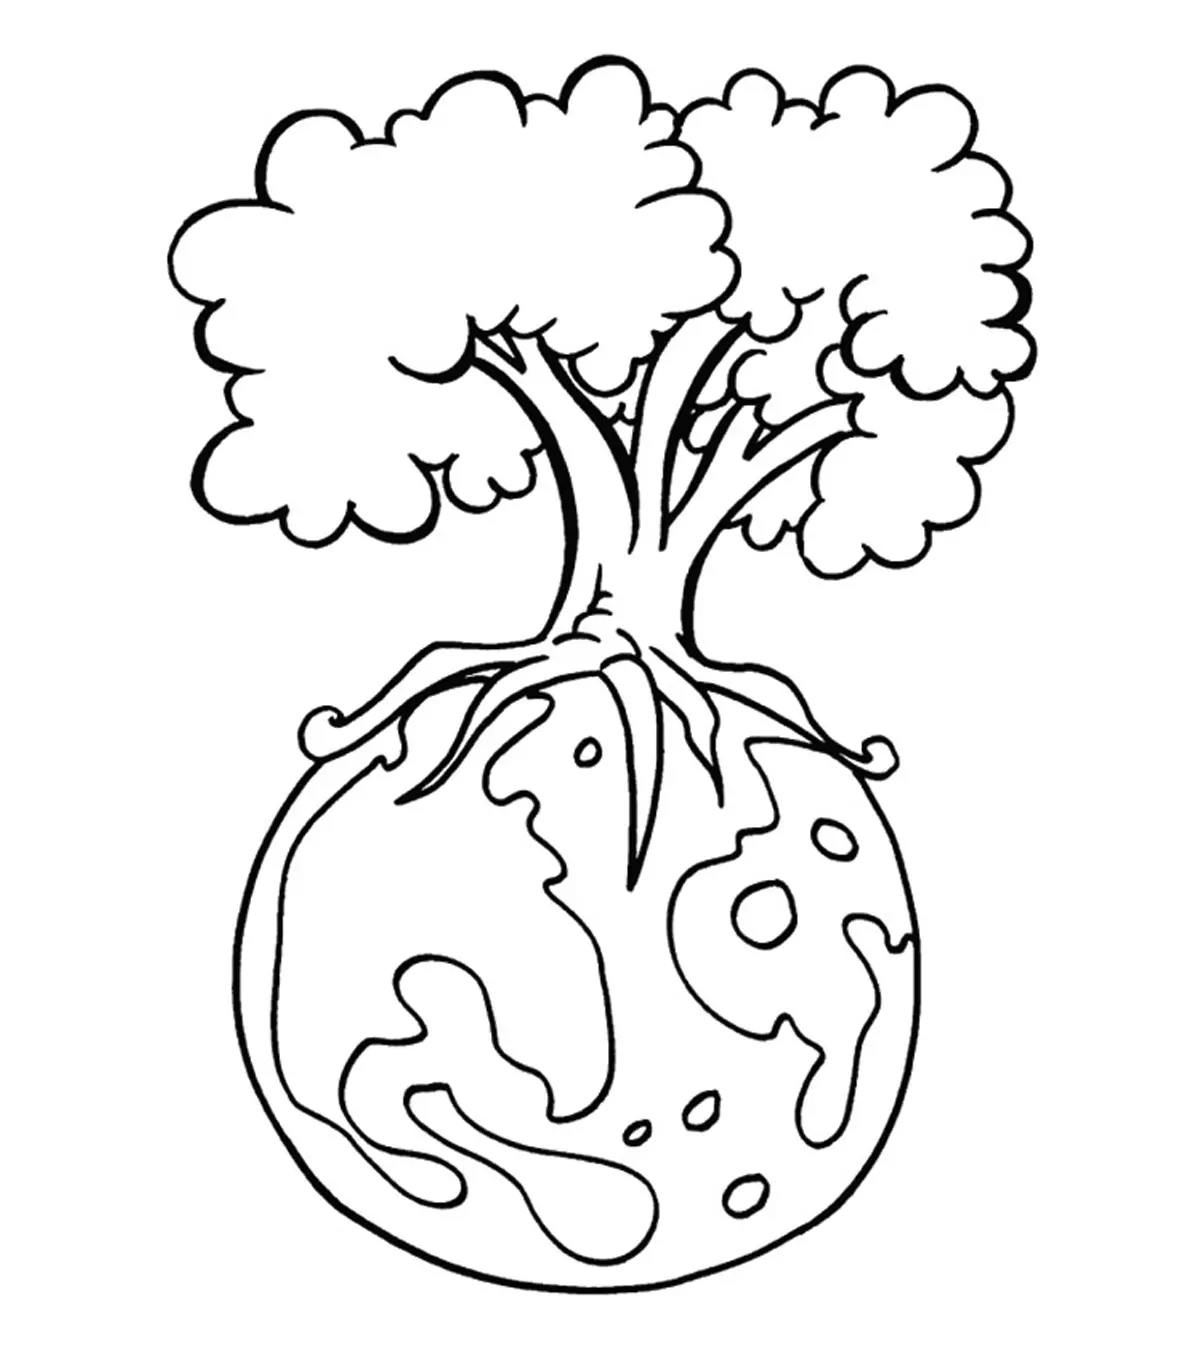 27 Printable Nature Coloring Pages For Your Little Ones image